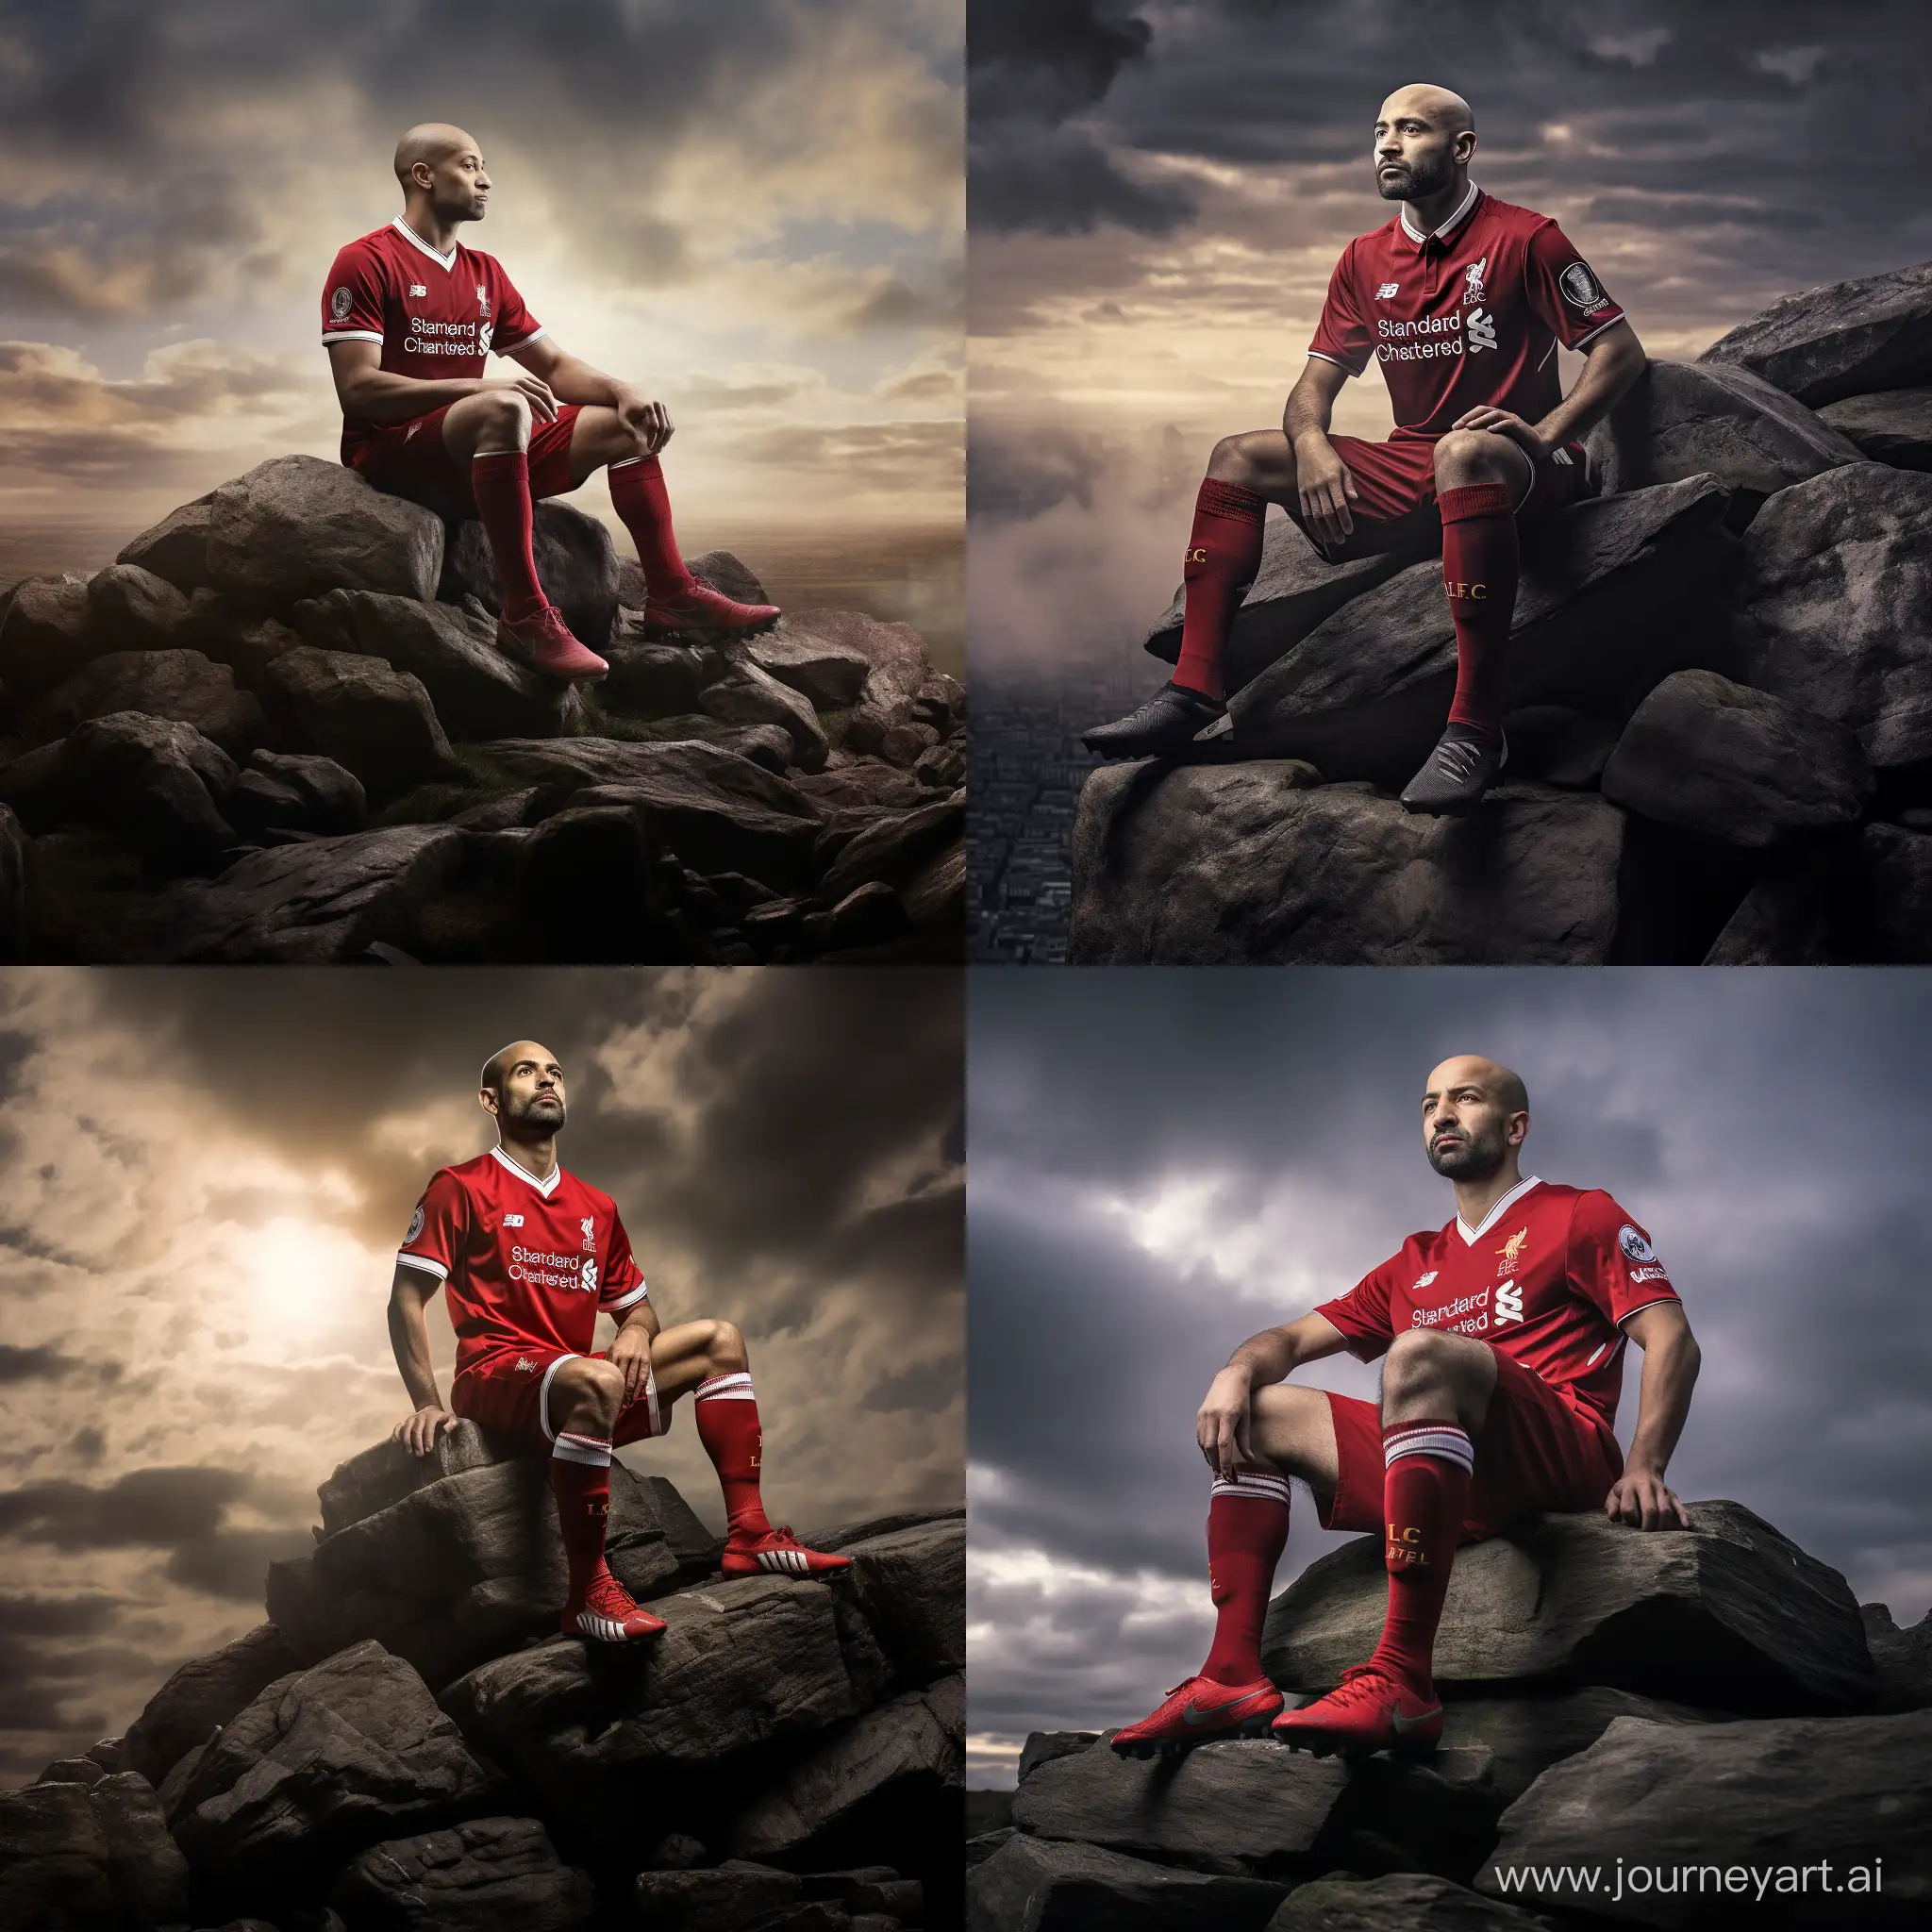 Capture a breathtaking cinematic scene where Muhammed salah perches regally atop a rugged rock formation, resembling a king surveying its kingdom. The man should be adorned in the iconic Liverpool FC attire, featuring a meticulously detailed Liverpool FC jersey.  the rugged beauty of the rock, and the dynamic essence of the Liverpool FC jersey. Pay close attention to lighting, shadows, and textures to achieve a realistic and visually stunning image that seamlessly blends the natural world with the spirit of Liverpool FC. Bring forth a sense of majesty and pride, as if the man itself is a symbol of the team's strength and triumph. The final image should evoke a cinematic atmosphere that transports viewers into this unique and captivating moment. should wear liverpool football club red jersey